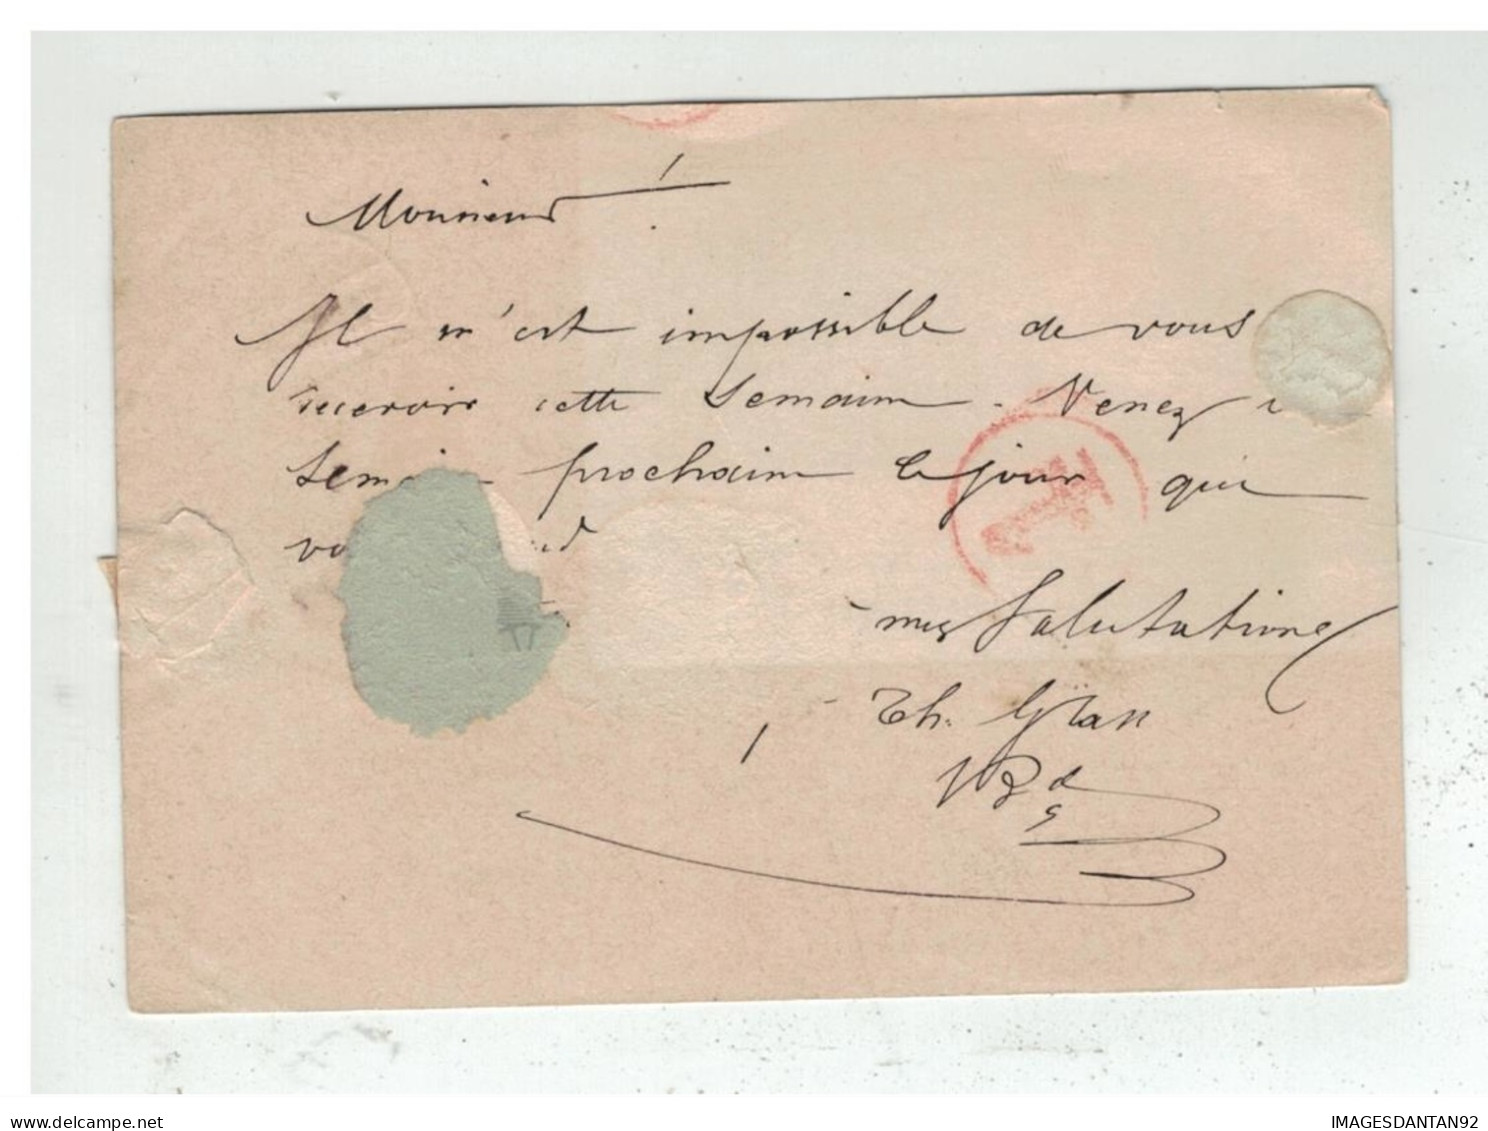 SUISSE ENTIER POSTAL LAUSANNE A GENEVE 1872 - Stamped Stationery